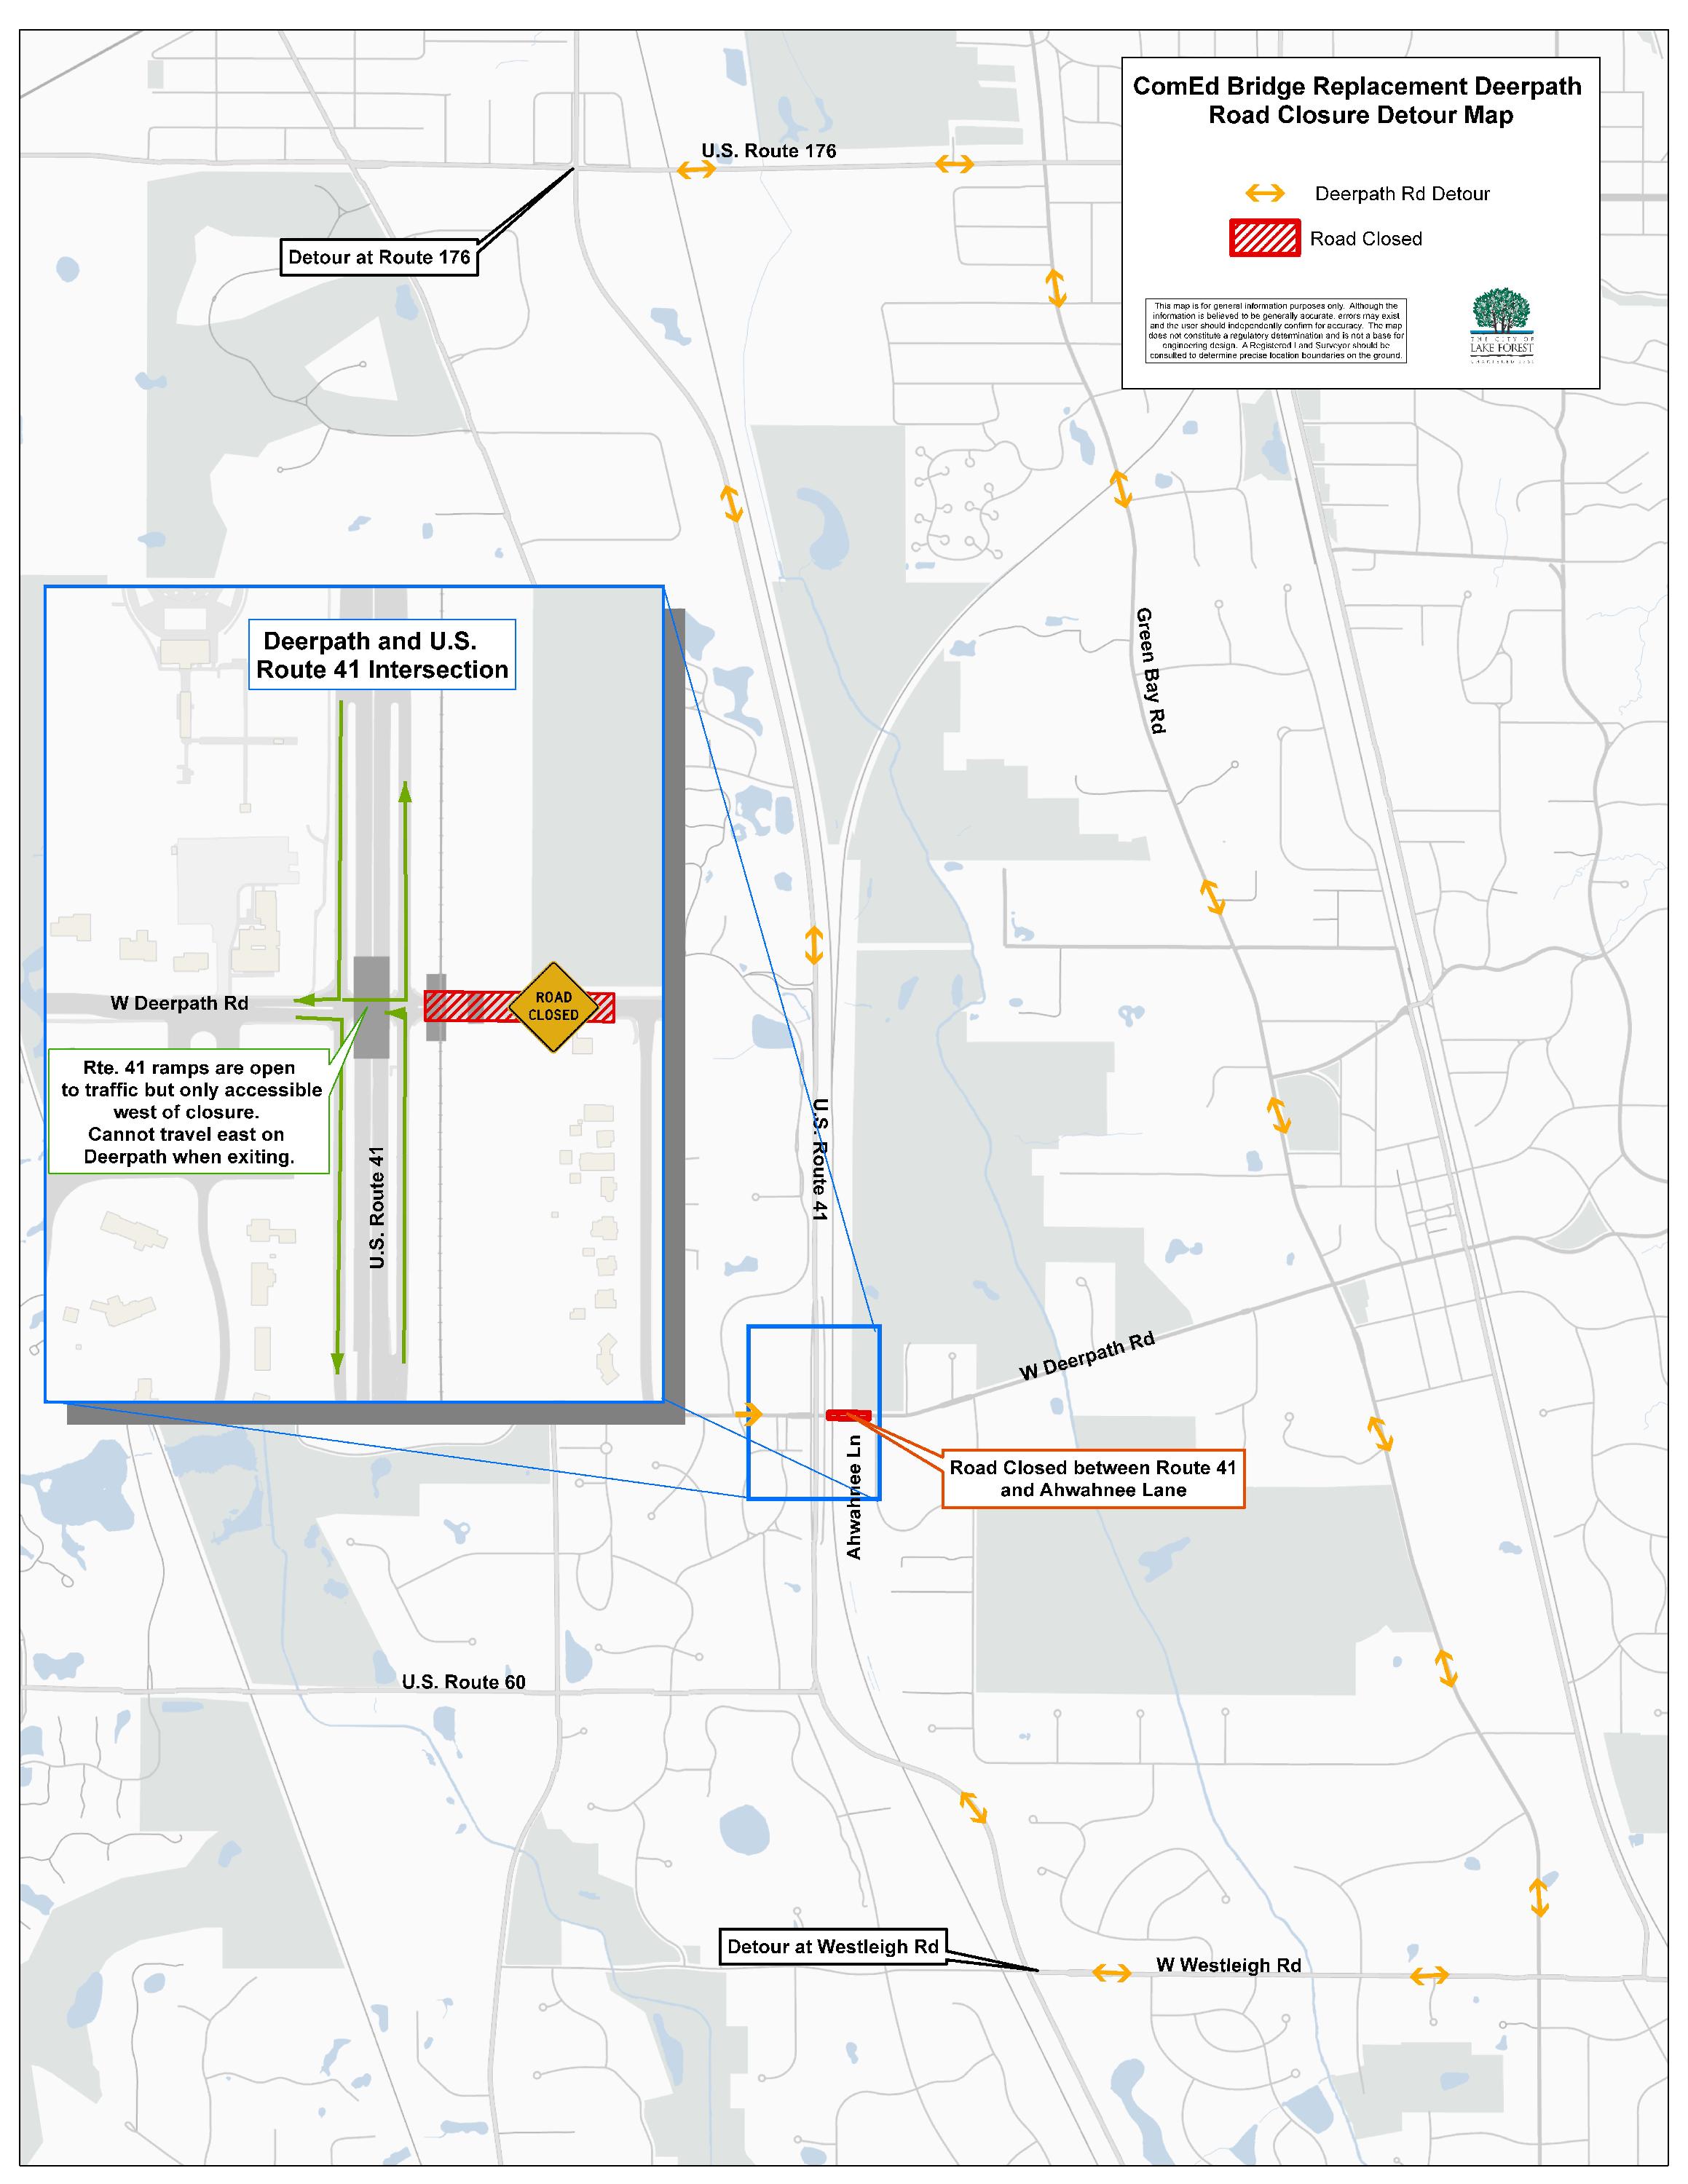 ComEd Bridge Detour Map, directs traffic to Westleigh Rd